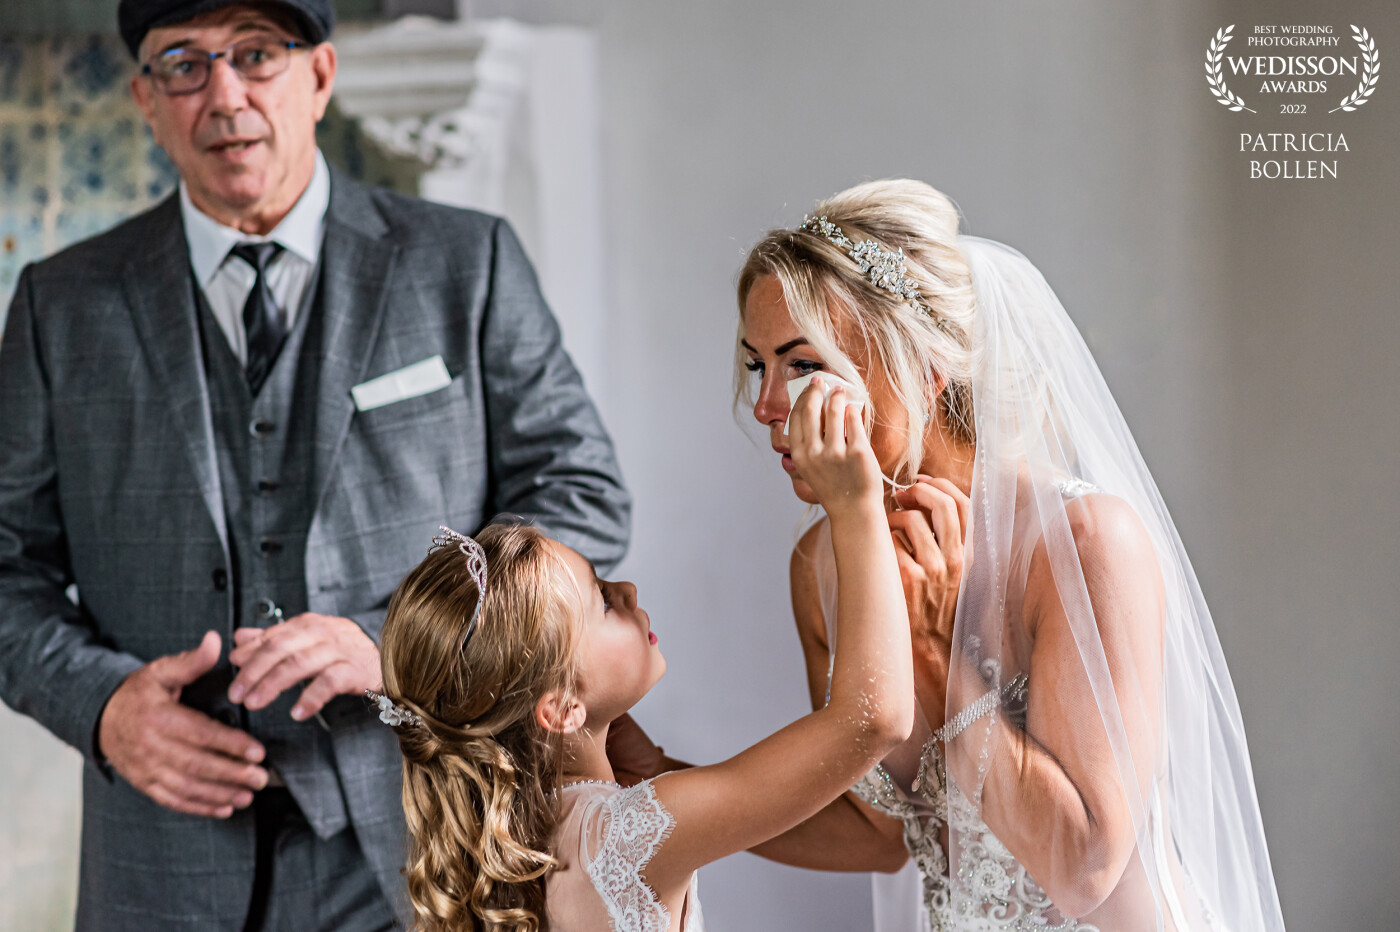 This beautiful bride just had the first look with her dad before he gave het away. The daughter of the bride helped to keep her mom's eyes dry